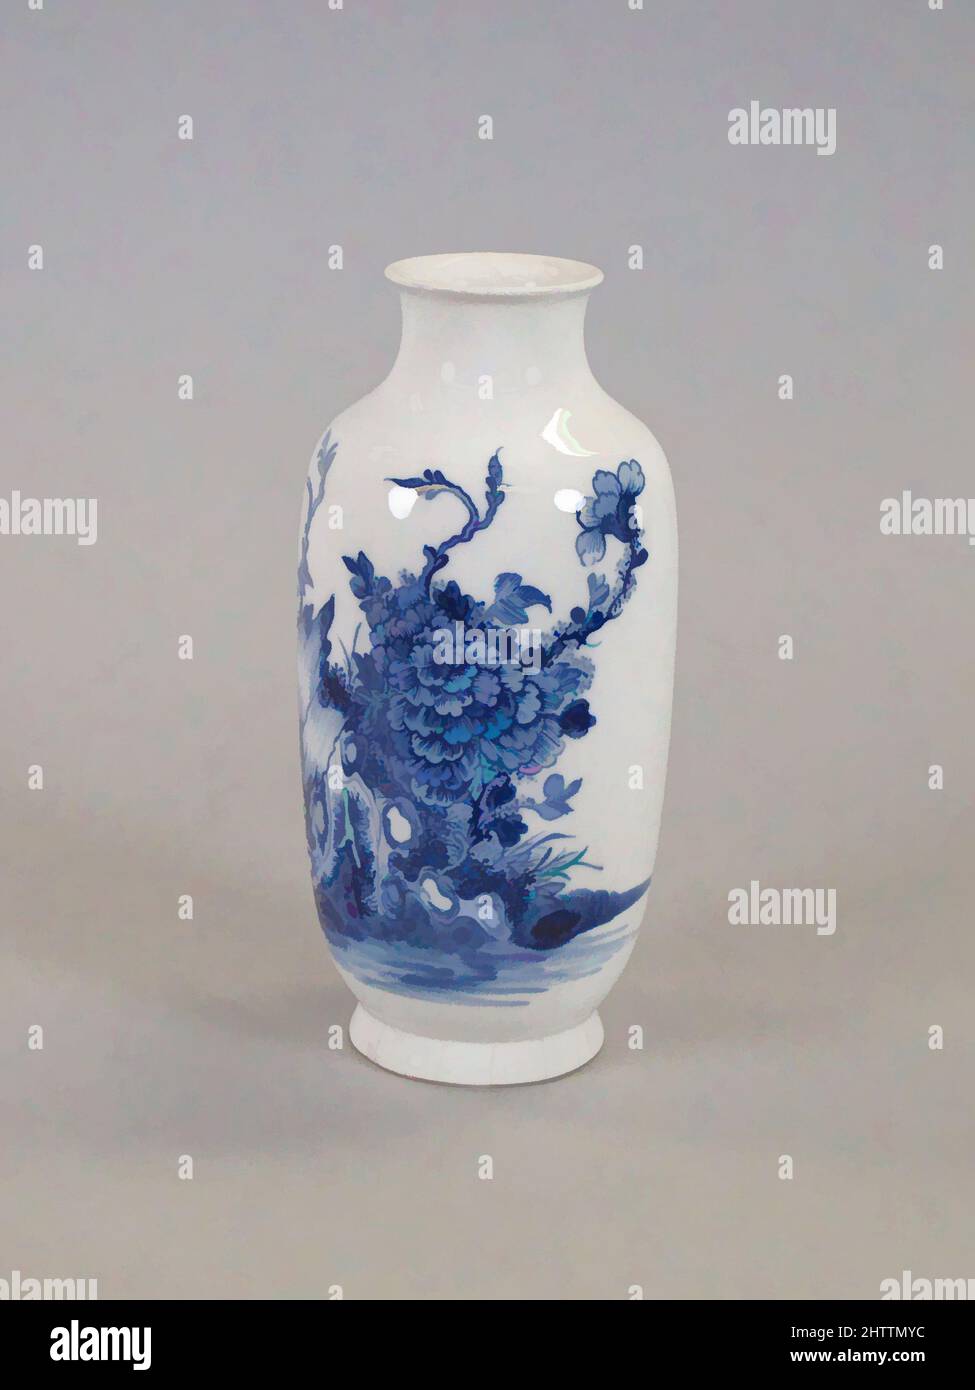 Art inspired by Vase, Qing dynasty (1644–1911), Qianlong period (1736–95), China, Porcelain decorated in underglaze blue, with crackled white glaze, H. 7 in. (17.8 cm), Ceramics, Classic works modernized by Artotop with a splash of modernity. Shapes, color and value, eye-catching visual impact on art. Emotions through freedom of artworks in a contemporary way. A timeless message pursuing a wildly creative new direction. Artists turning to the digital medium and creating the Artotop NFT Stock Photo